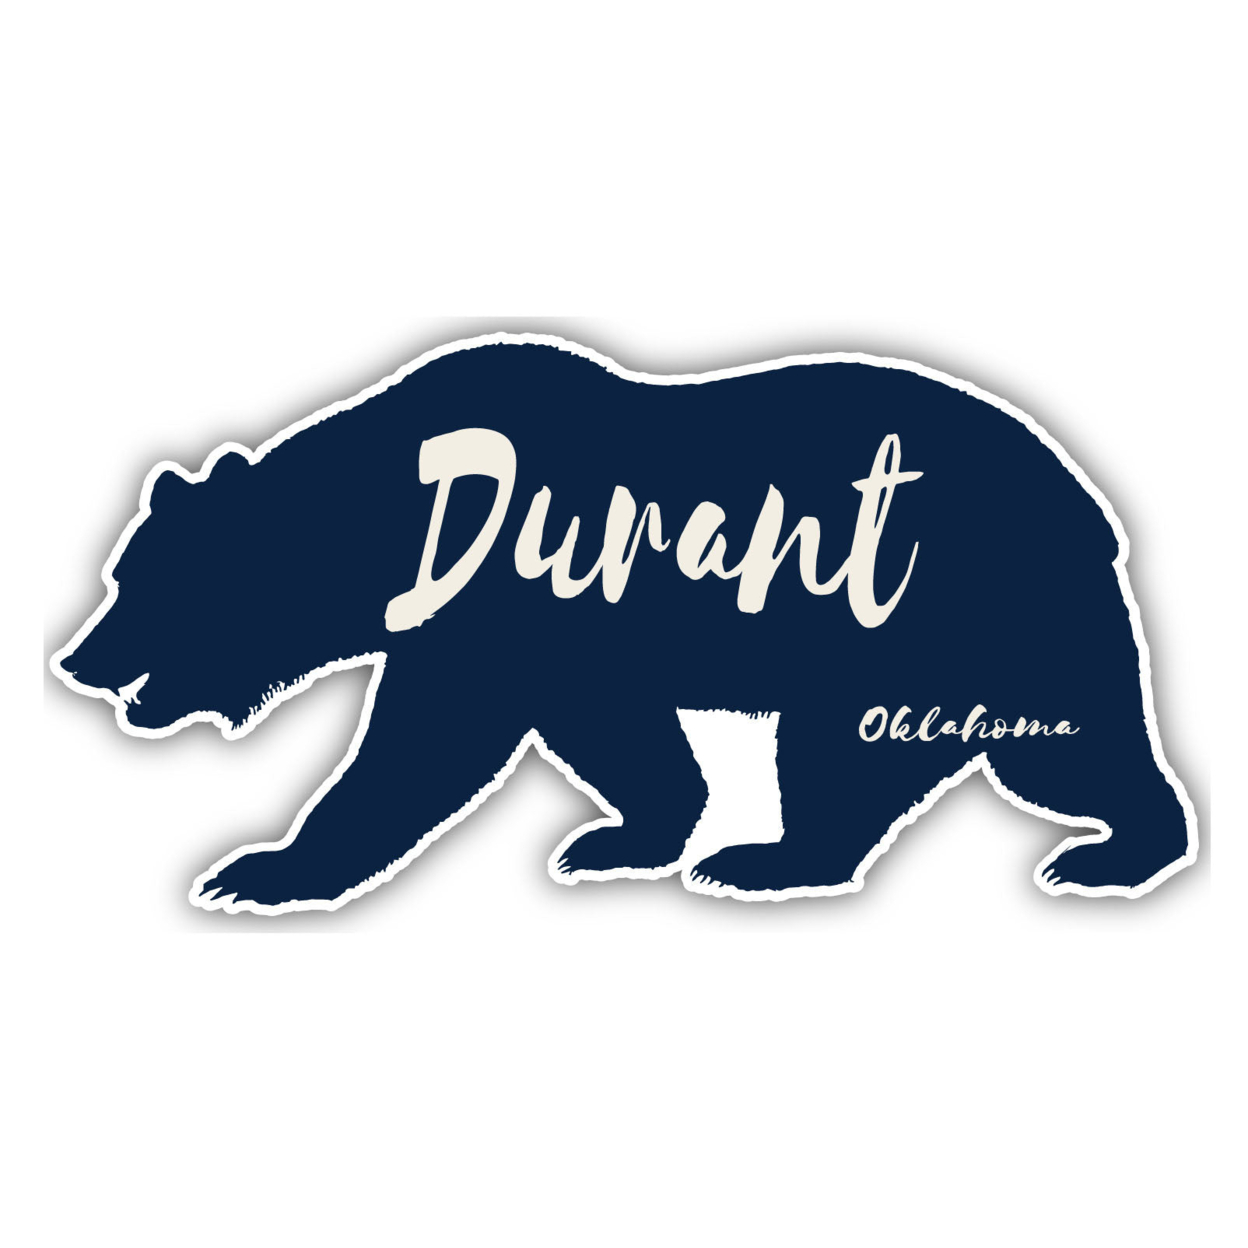 Durant Oklahoma Souvenir Decorative Stickers (Choose Theme And Size) - 4-Pack, 12-Inch, Bear